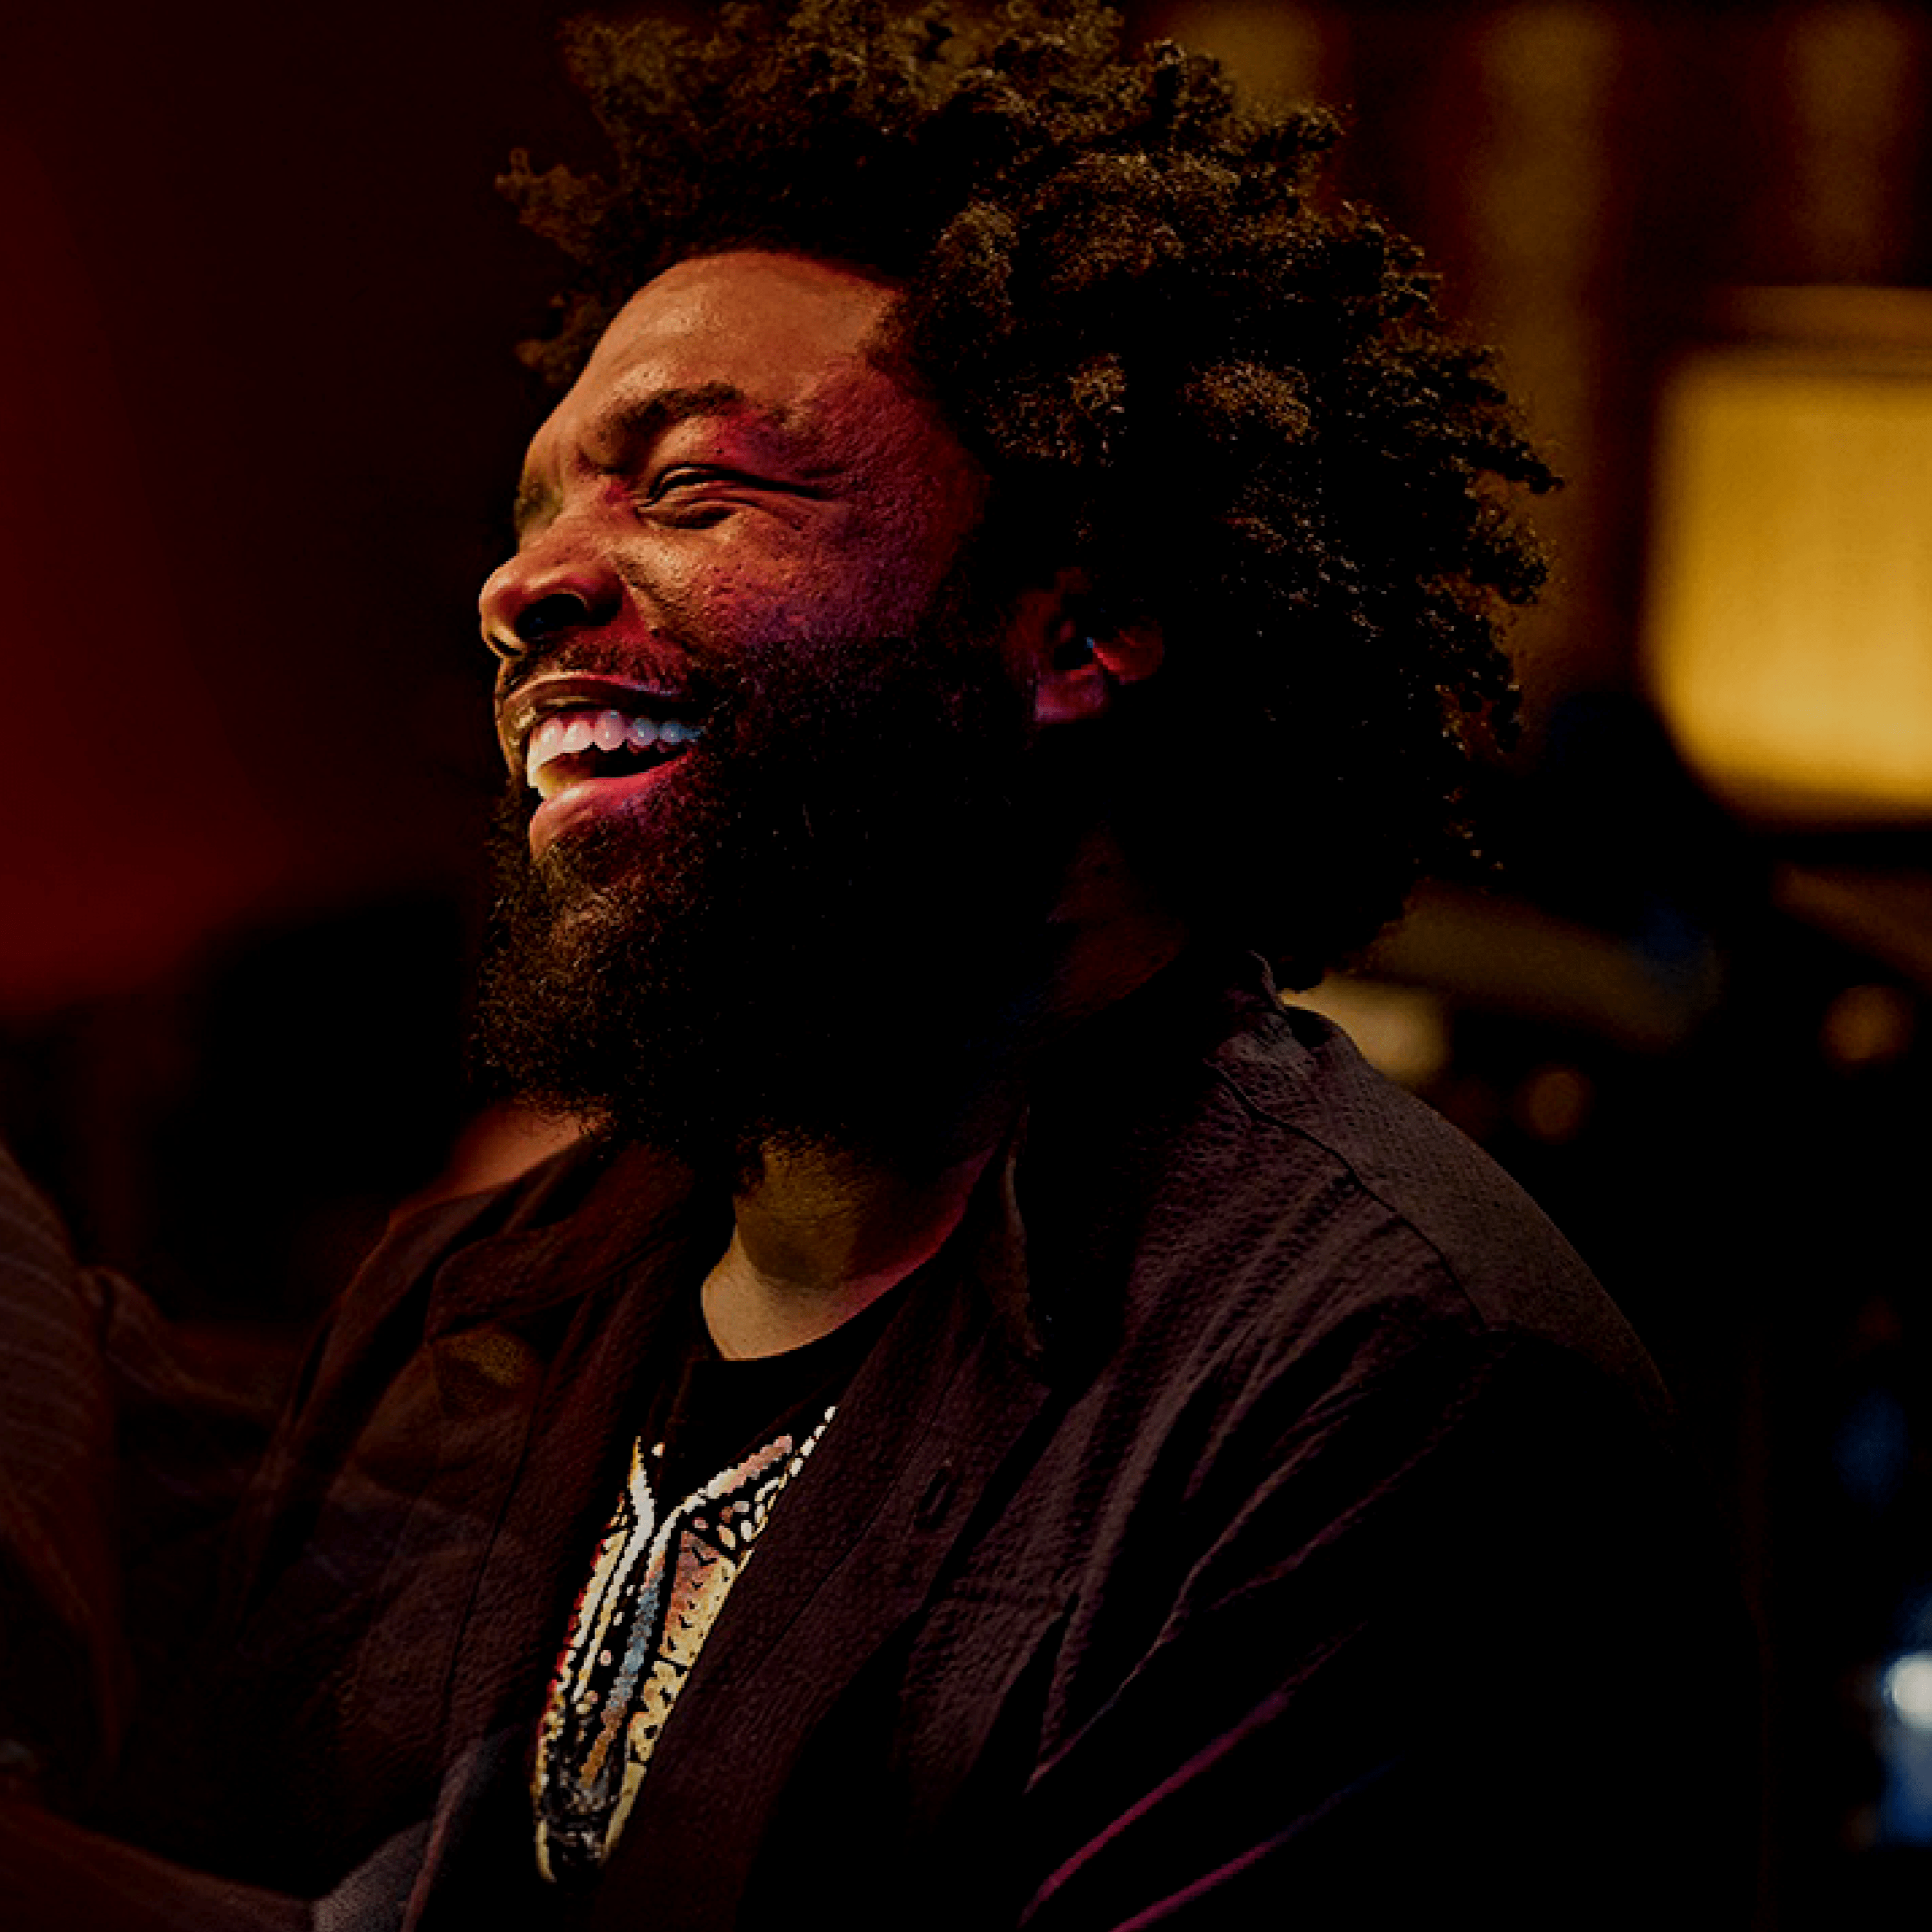 Questlove Interviews Creatives Across Music, Comedy, Dance & Writing in “Quest for Craft” Season Two via 360 MAGAZINE.